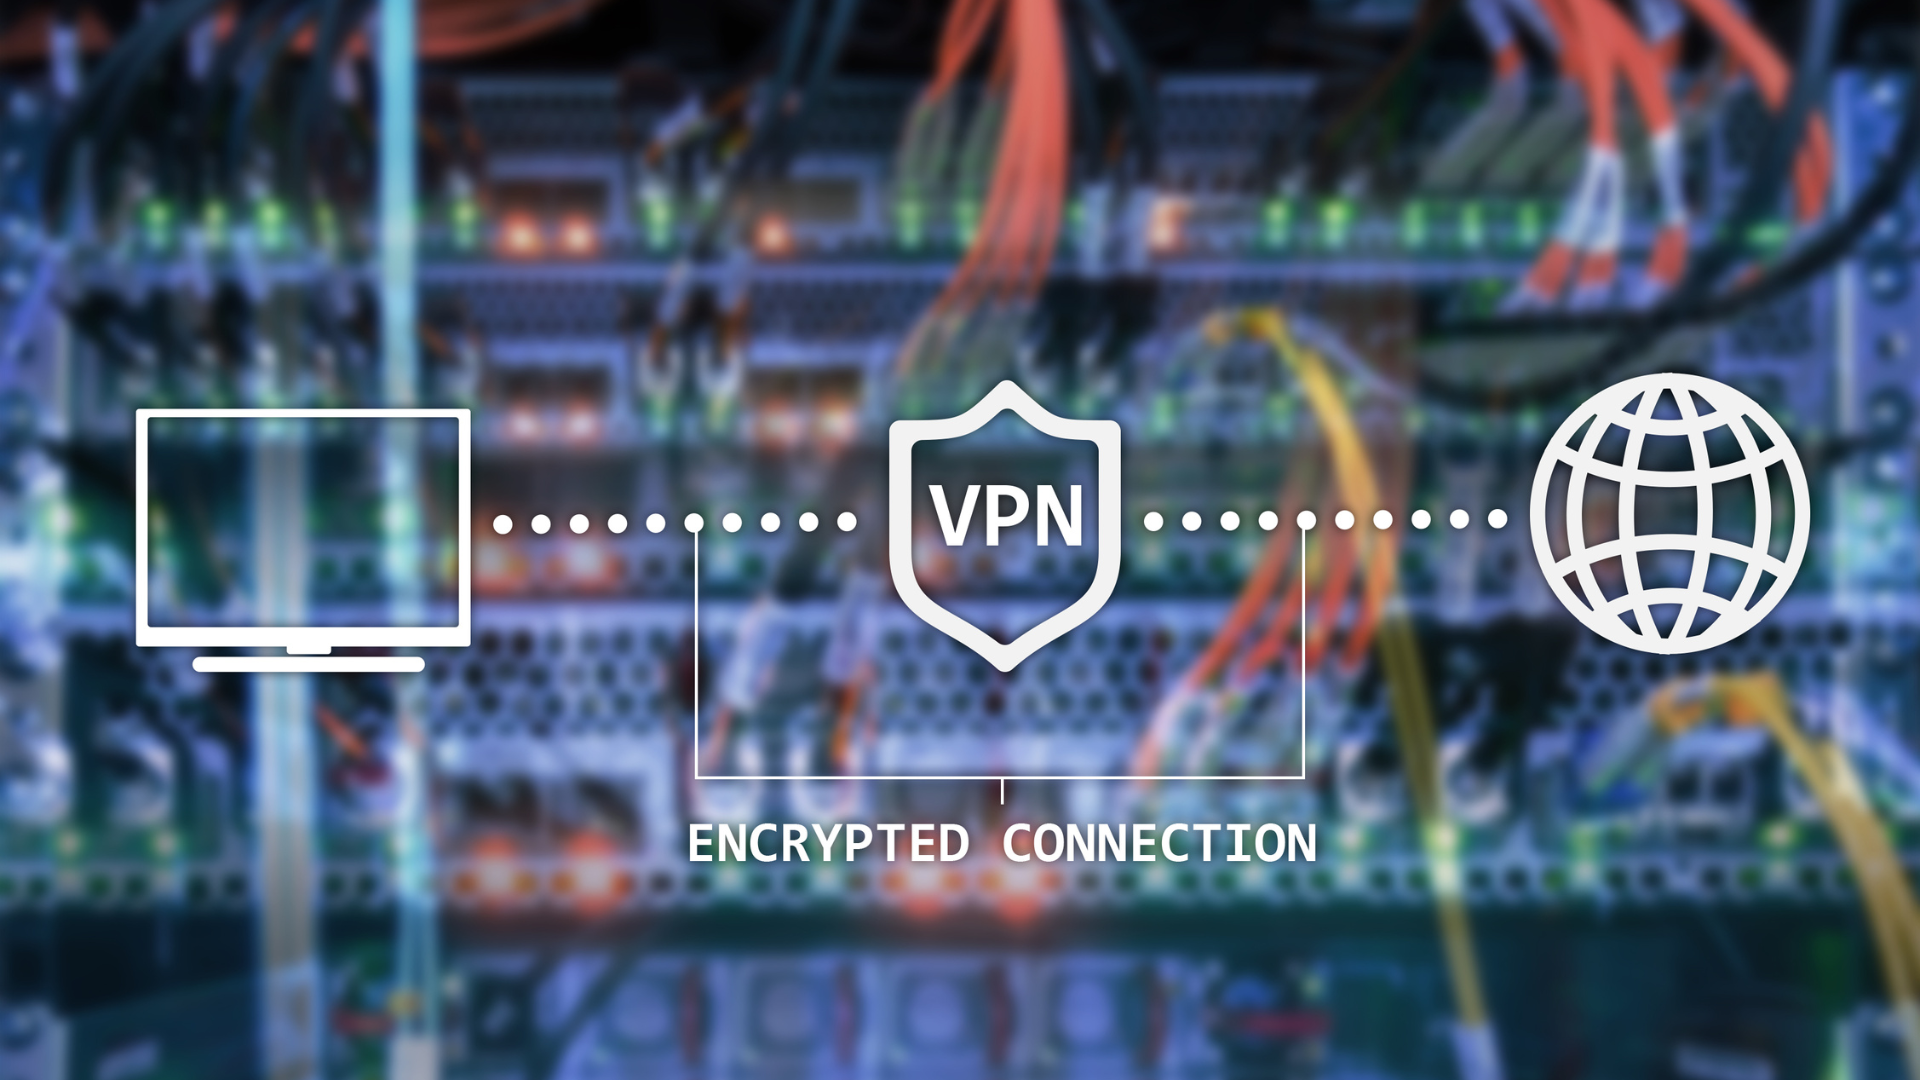 Navigating the World of VPNs: How to Choose the Best Provider